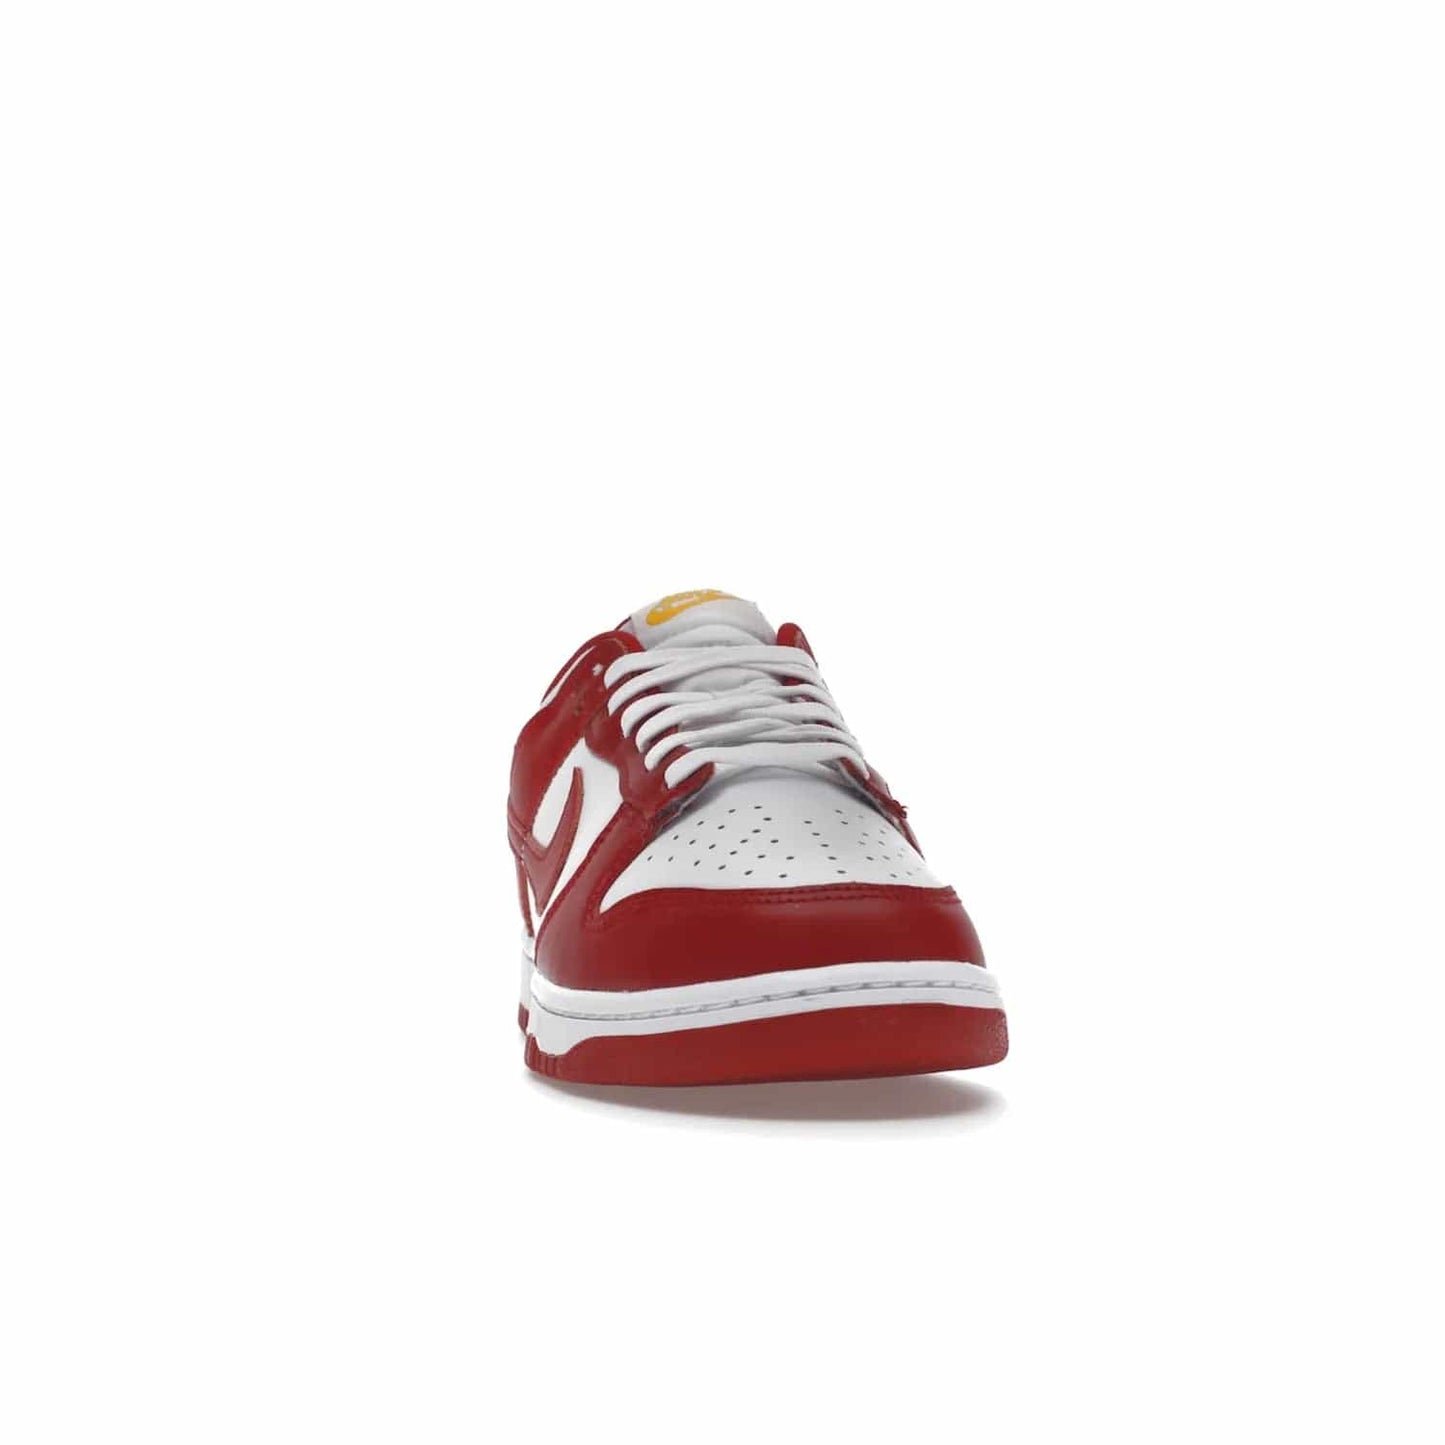 Nike Dunk Low USC - Image 9 - Only at www.BallersClubKickz.com - The Nike Dunk Low USC DD1391-602 colorway captures the eye of University of Southern California fans. Crafted with leather and rubber upper and outsole, this stylish sneaker features a white, gym red, and yellow colorway. With yellow Nike branding, white perforated vamp, and red suede Swoosh, this sneaker turns heads. Get the classic Nike Dunk Low USC releasing on November 9th, 2022.